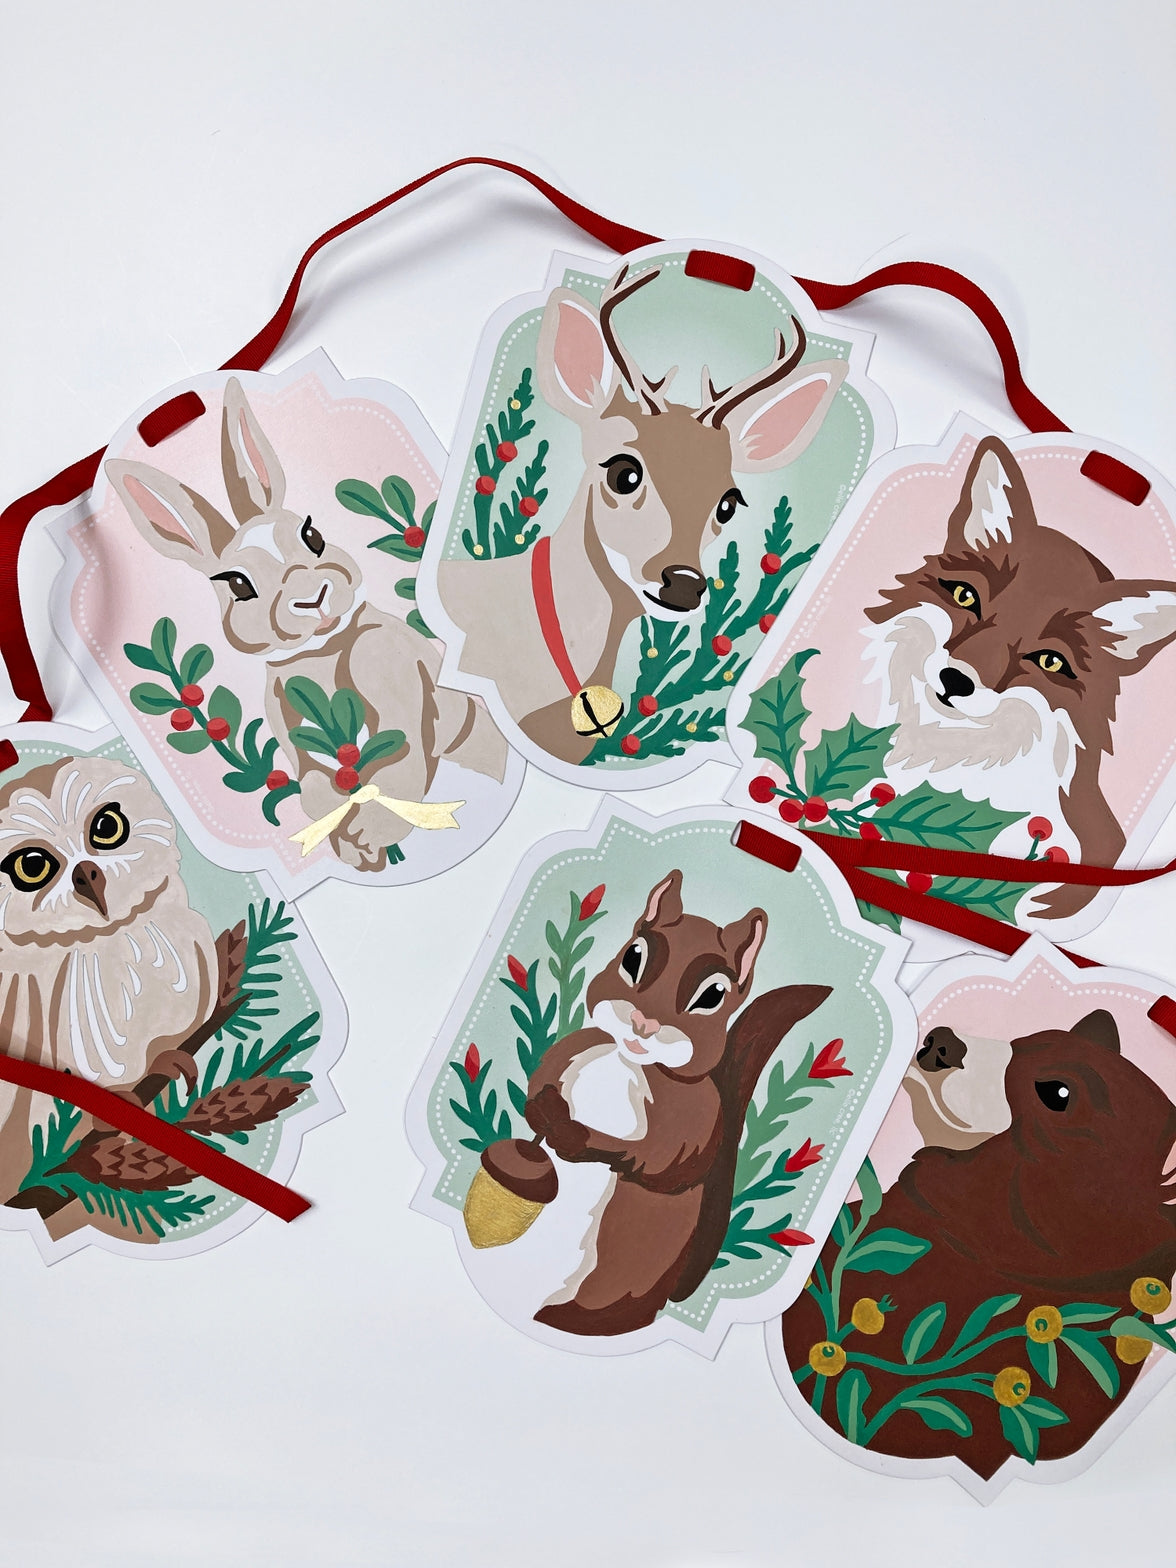 Holiday Forest Animals Paint-by-Numbers Hanging Banner Kit